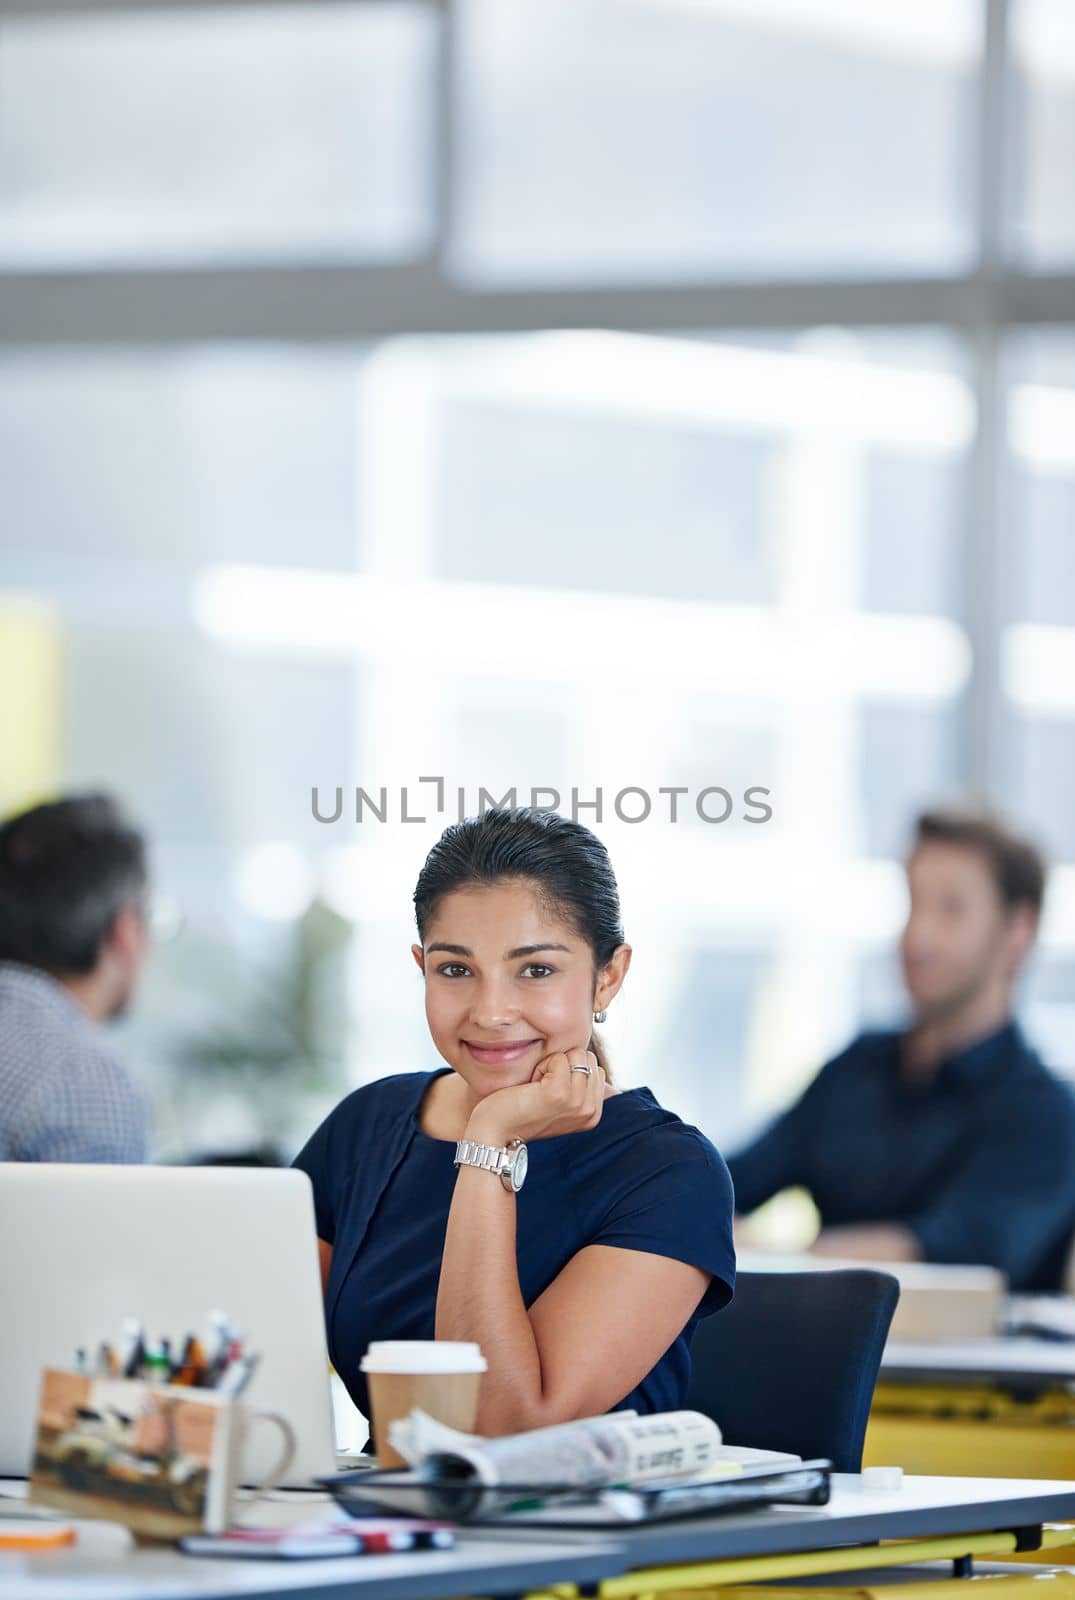 Work couldnt be better. Portrait of a designer sitting at her desk working on a laptop with colleagues in the background